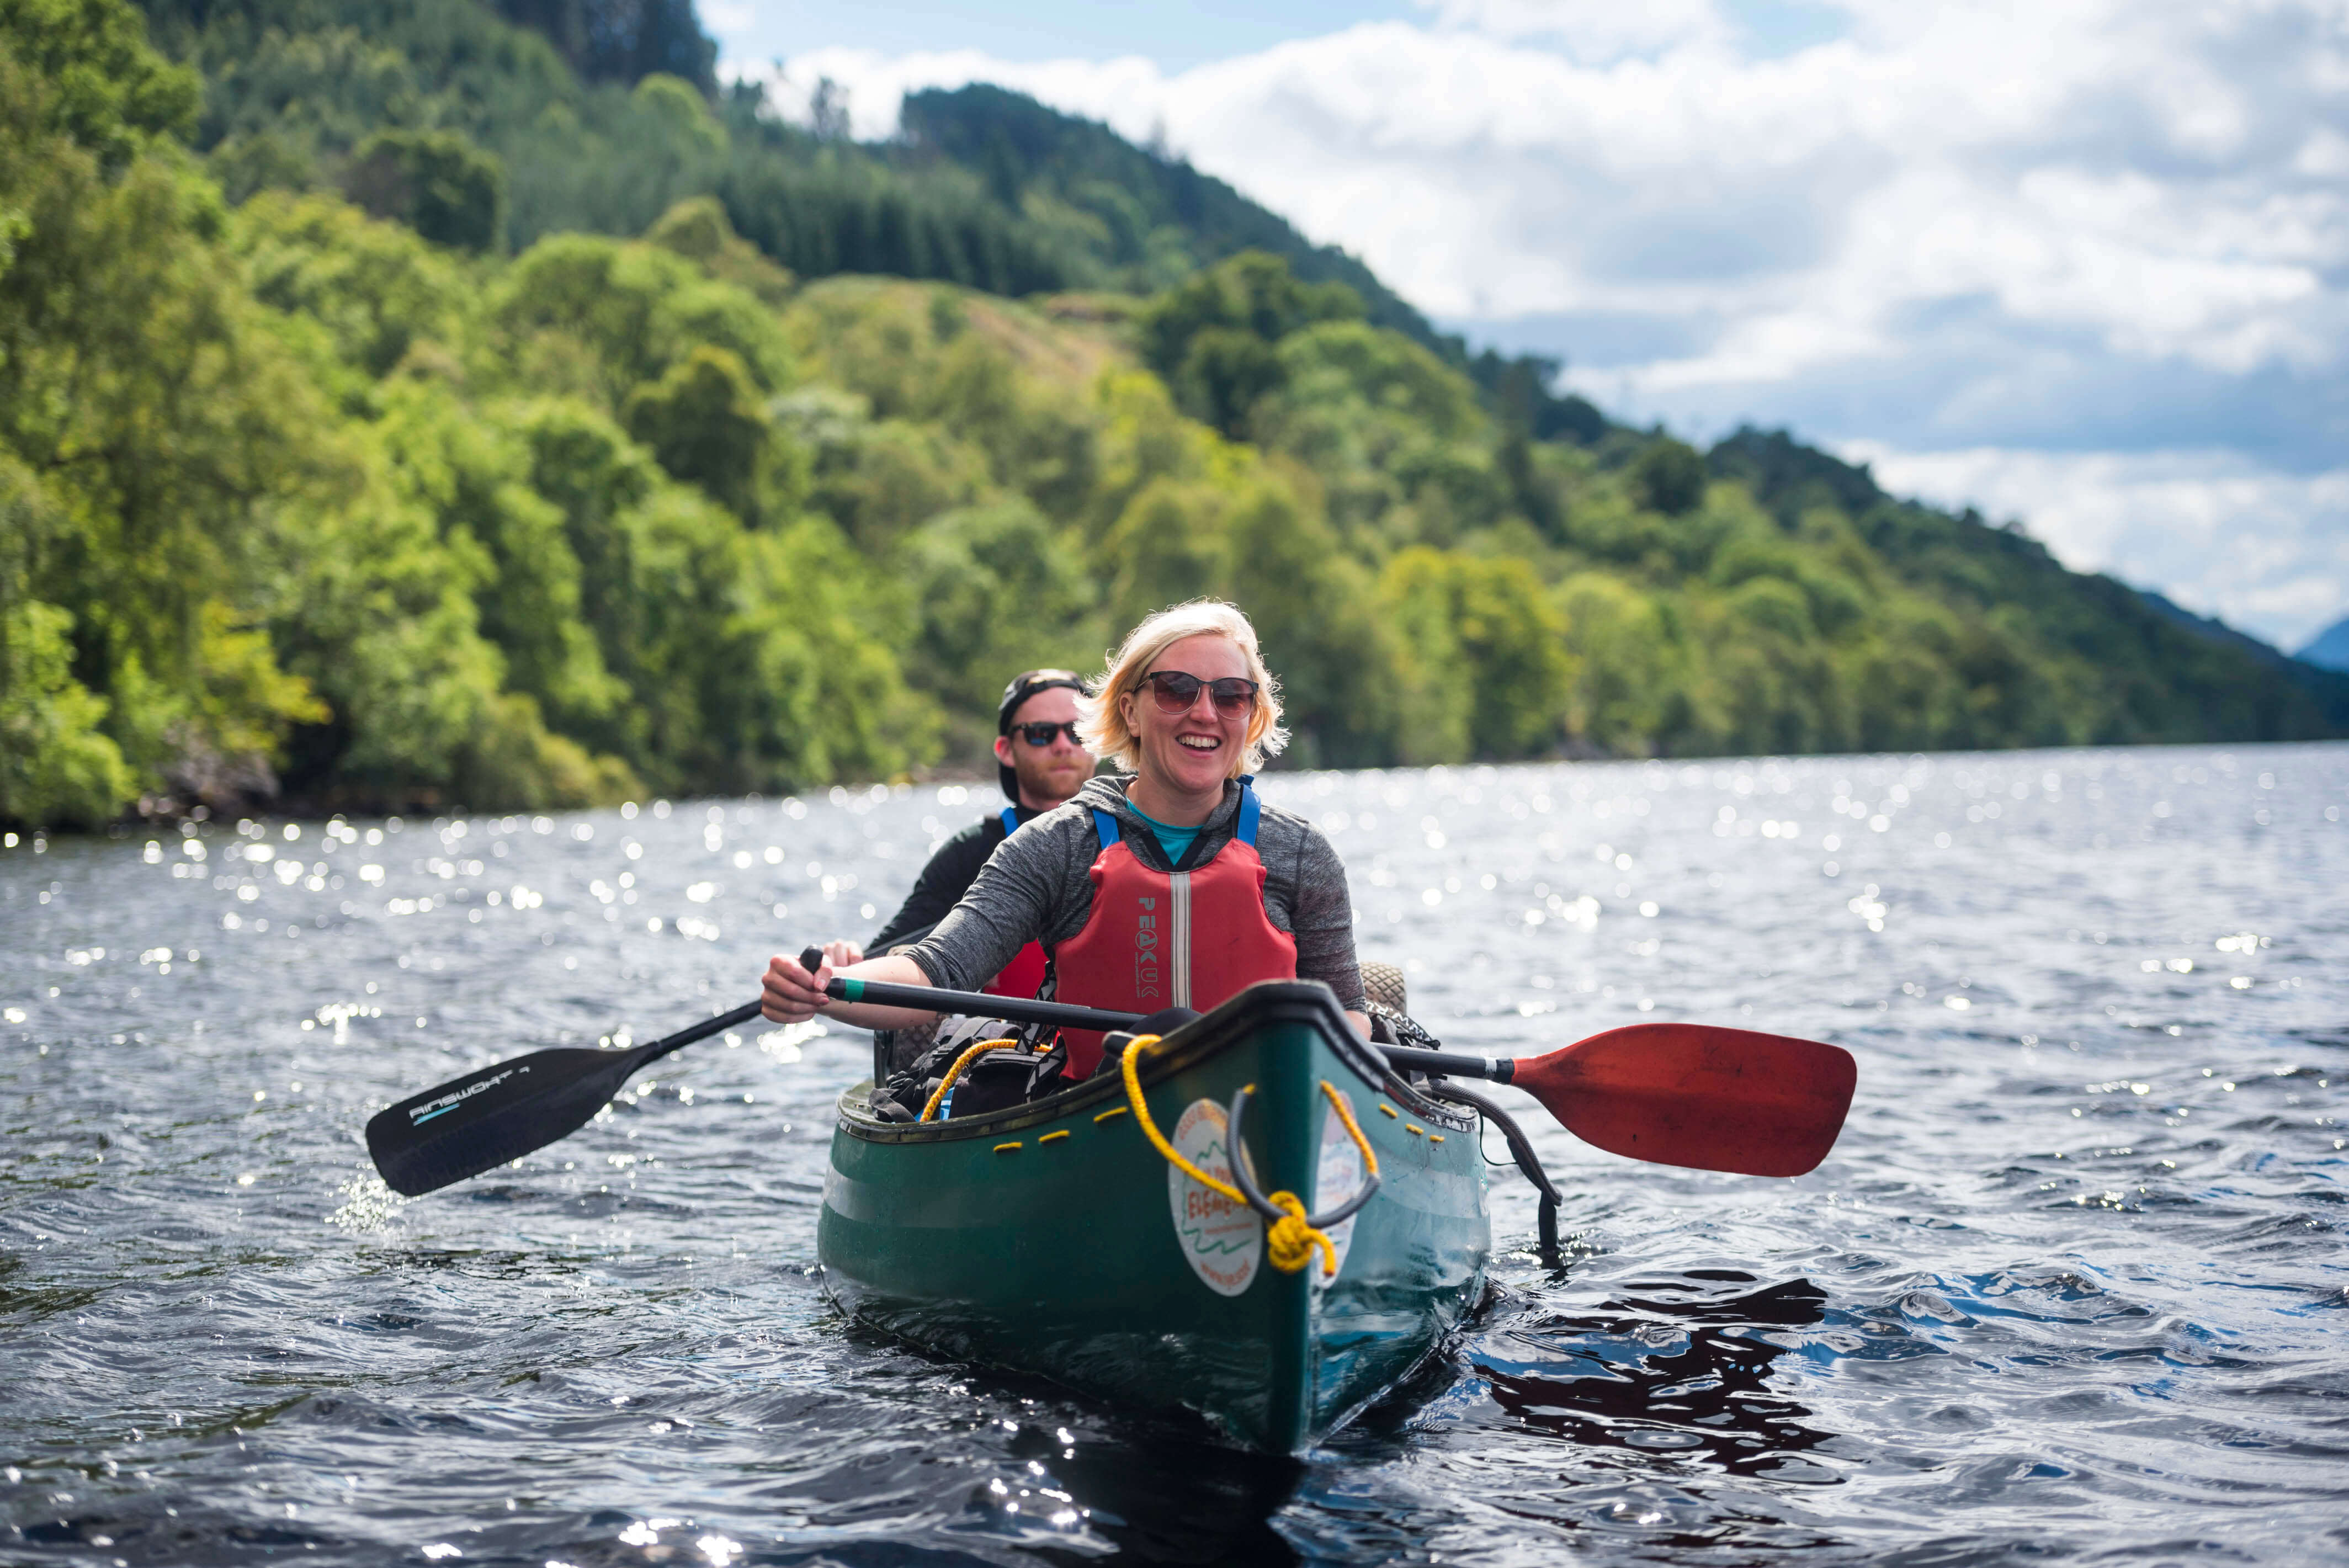 Caroline out canoeing in Scotland